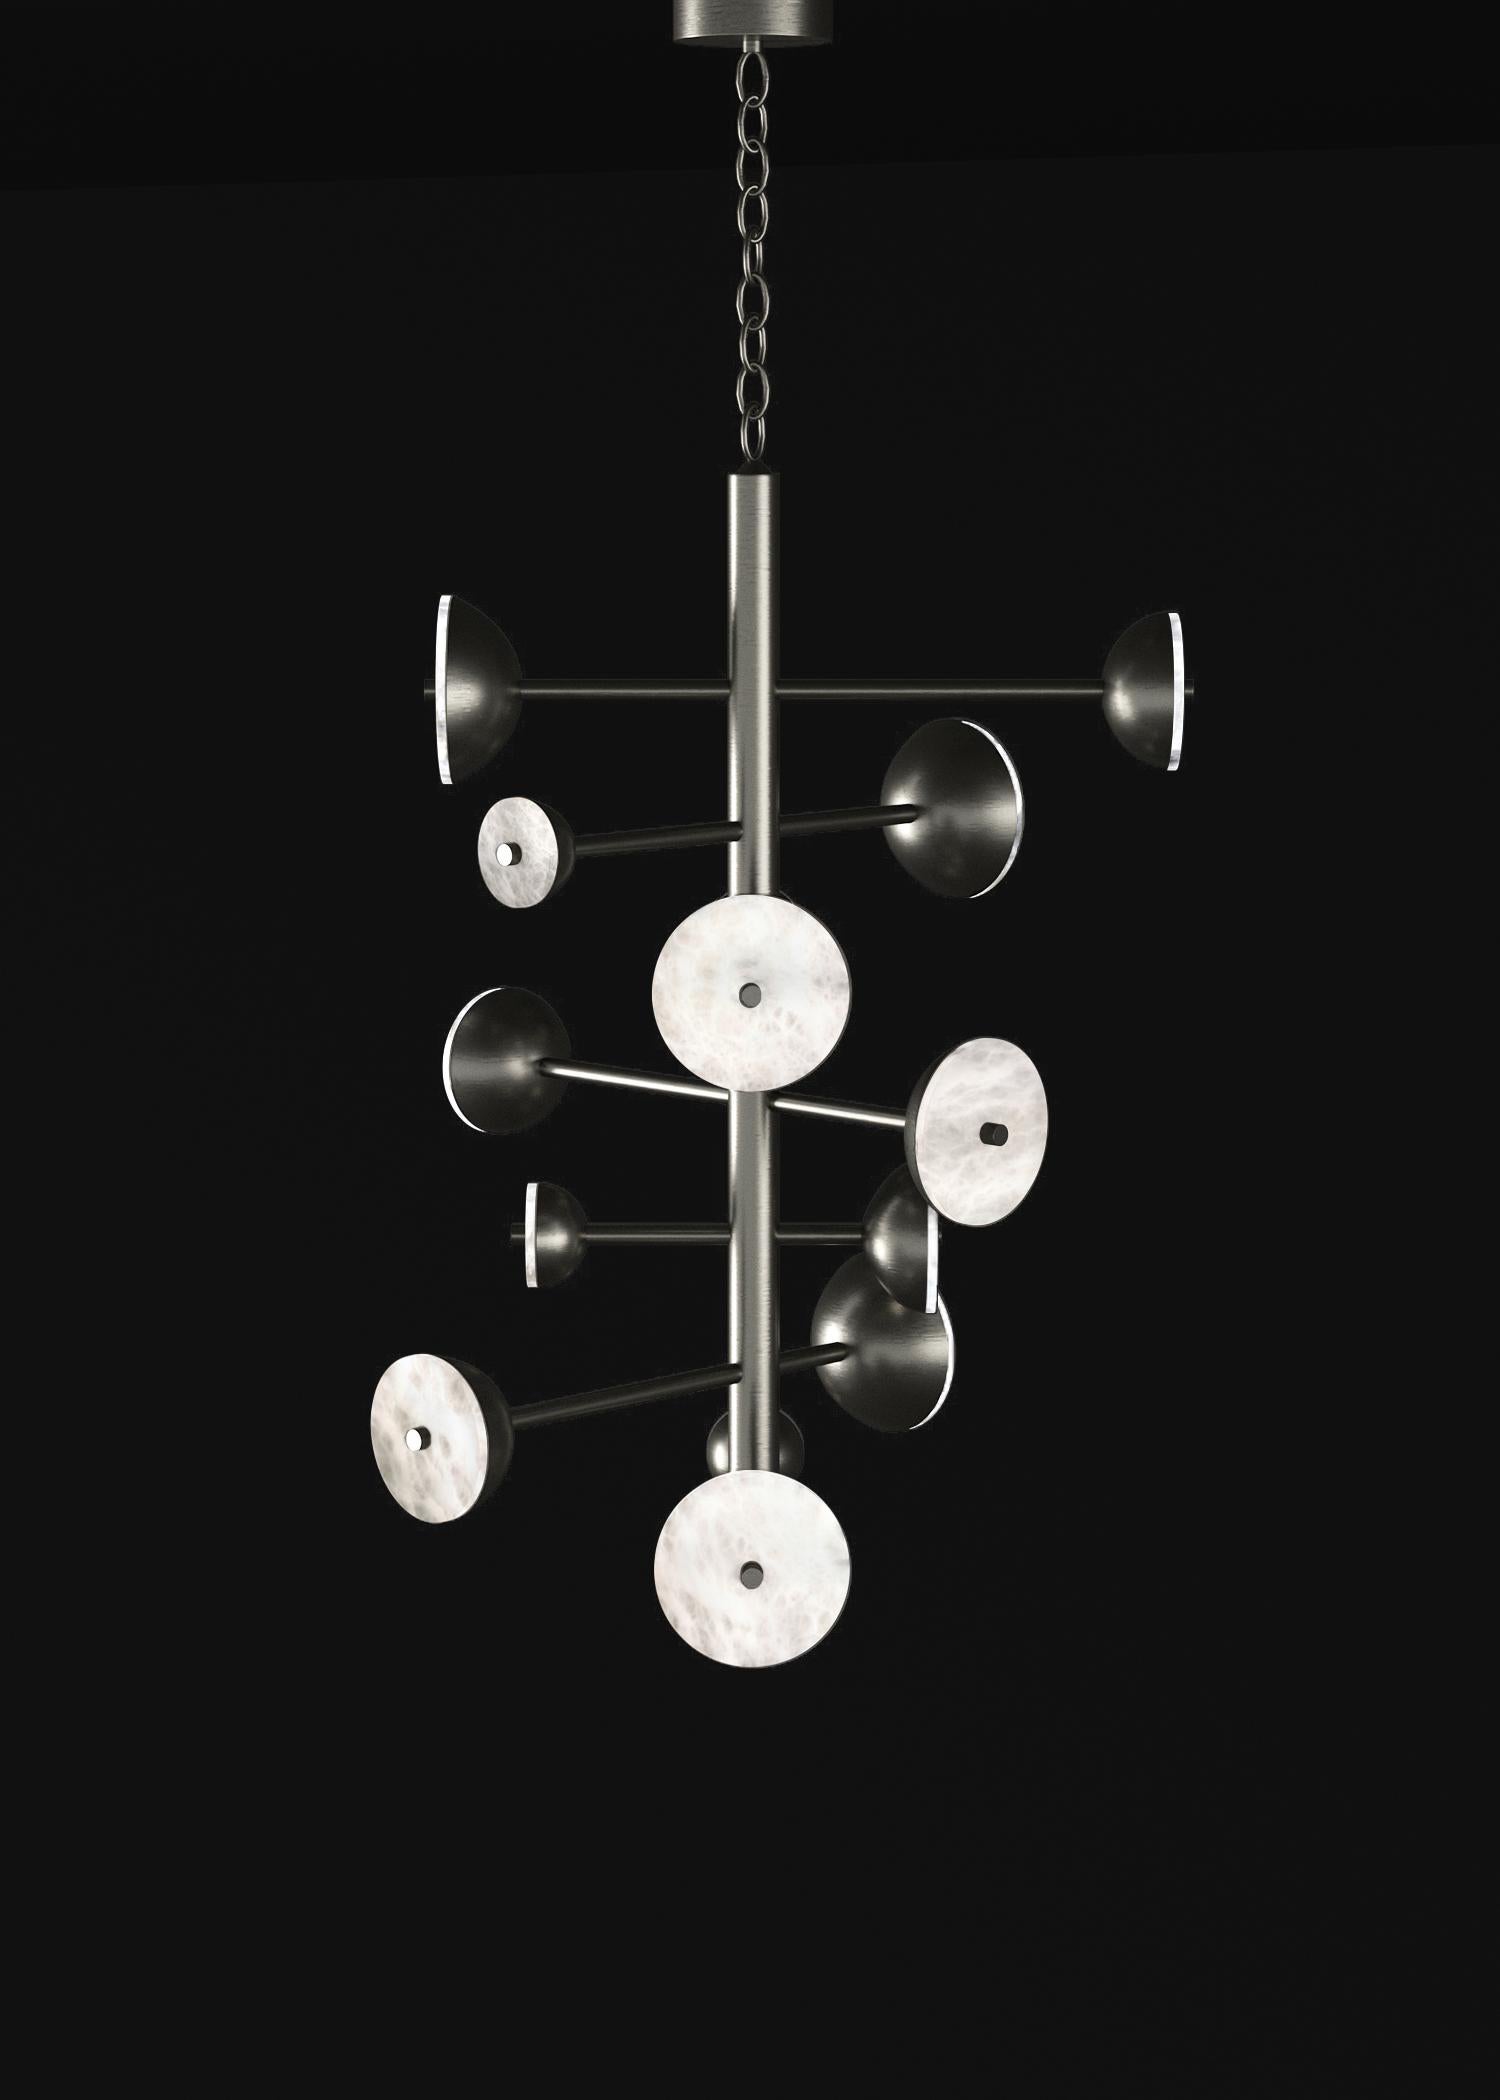 Teti Brushed Black Metal Chandelier by Alabastro Italiano
Dimensions: D 74,5 x W 77,5 x H 110 cm.
Materials: White alabaster and metal.

Available in different finishes: Shiny Silver, Bronze, Brushed Brass, Ruggine of Florence, Brushed Burnished,